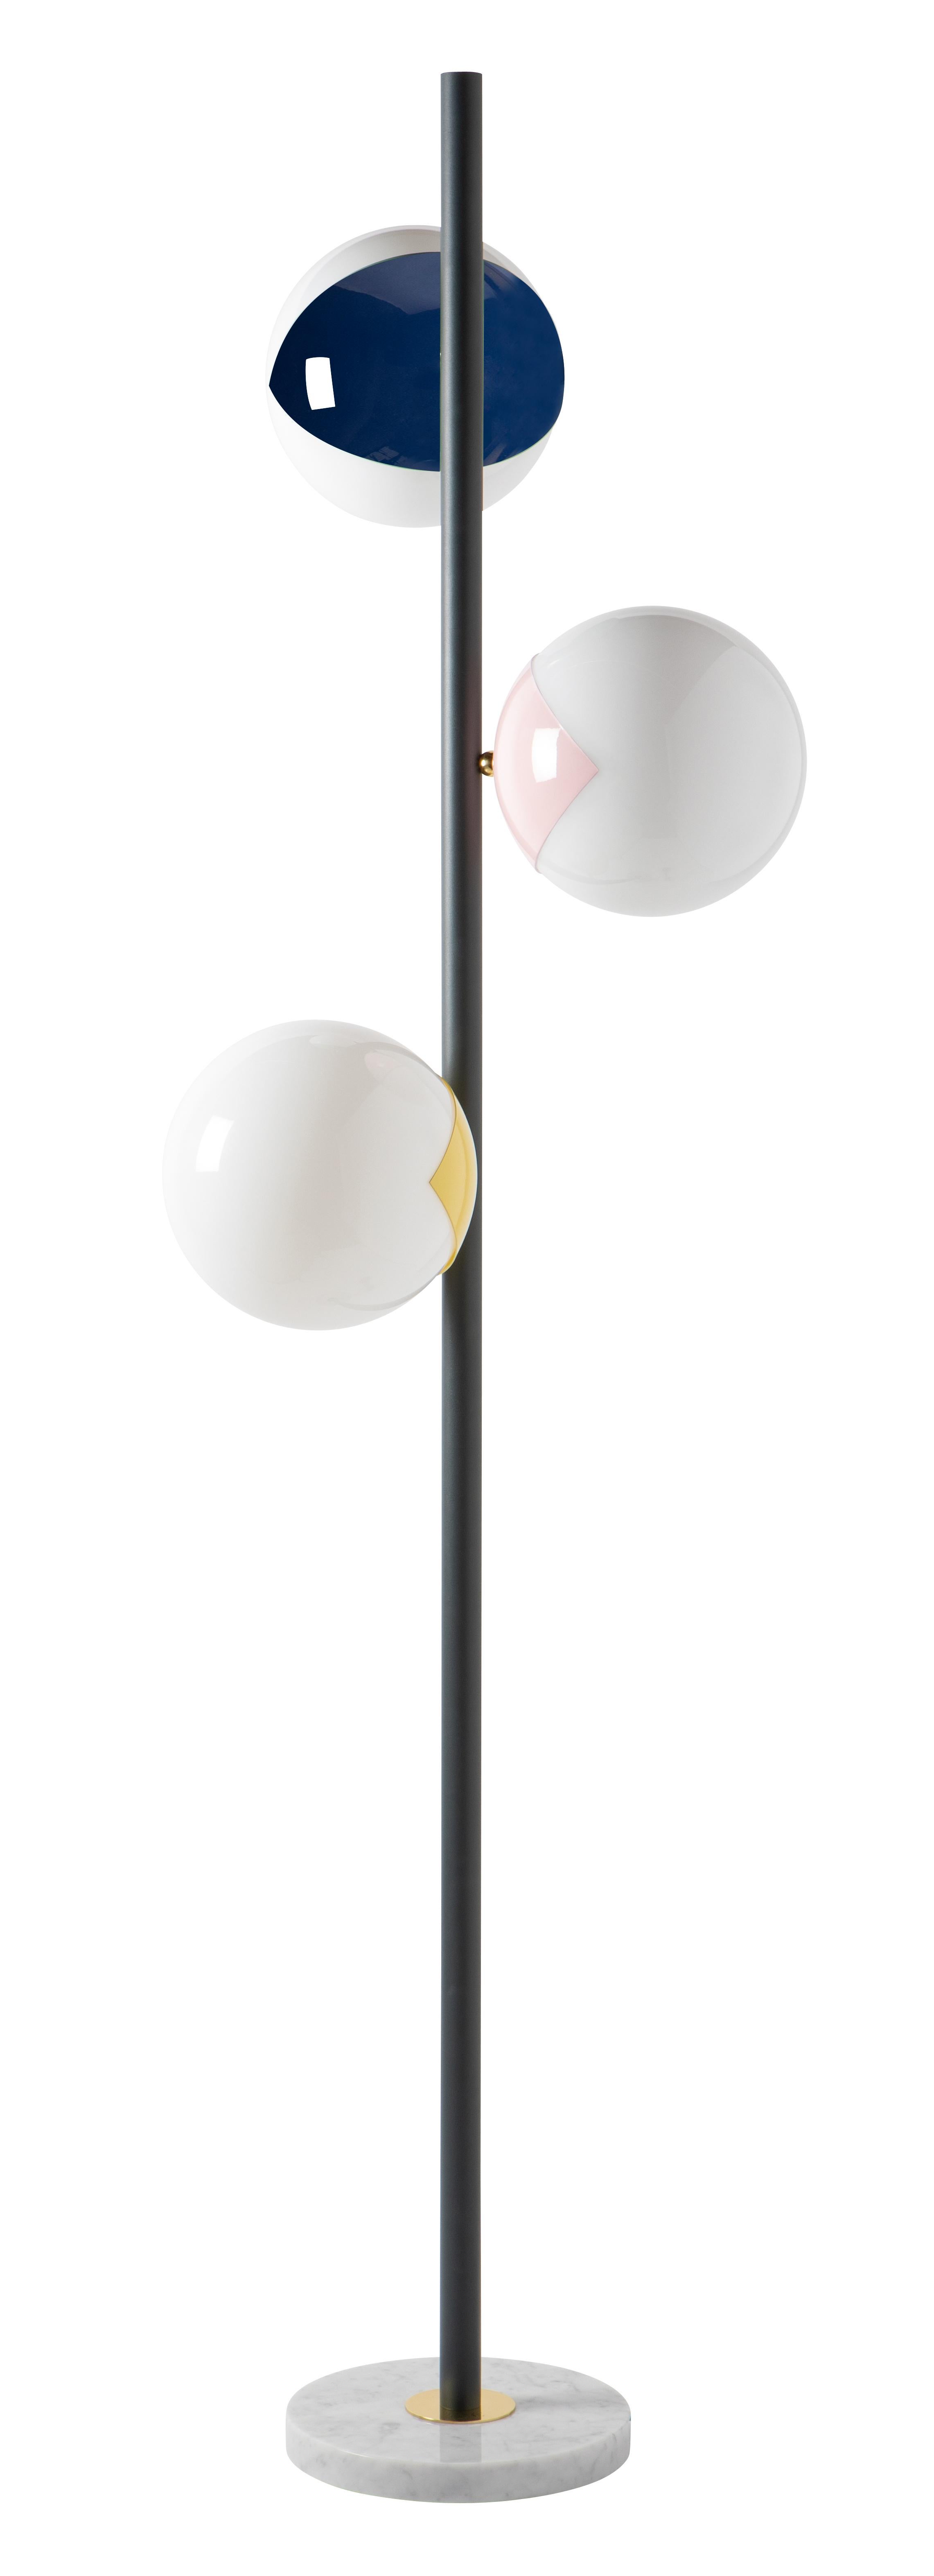 Pop up floor lamp by Magic Circus Editions.
Dimensions: W 170 x H 51 cm.
 diam sphere 22 cm.
Materials: Carrara marble base, smooth brass tube, glossy mouth blown glass.

Available finishes: Matte black tube and brass, matte black tube and